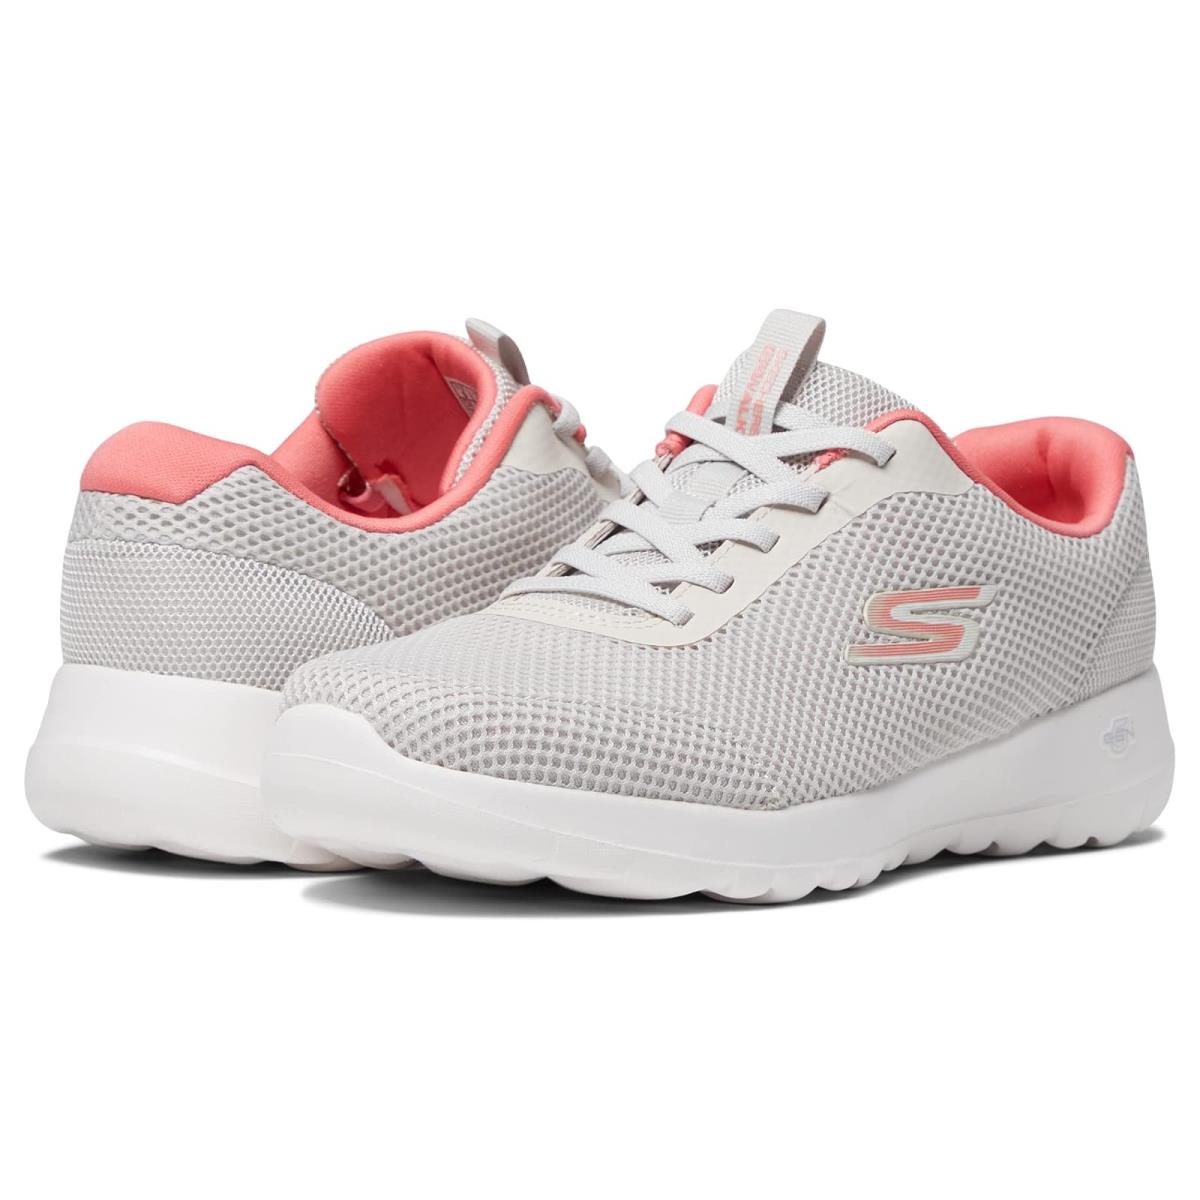 Woman`s Shoes Skechers Performance Go Walk Joy - Color Pop Lining Off-White/Pink